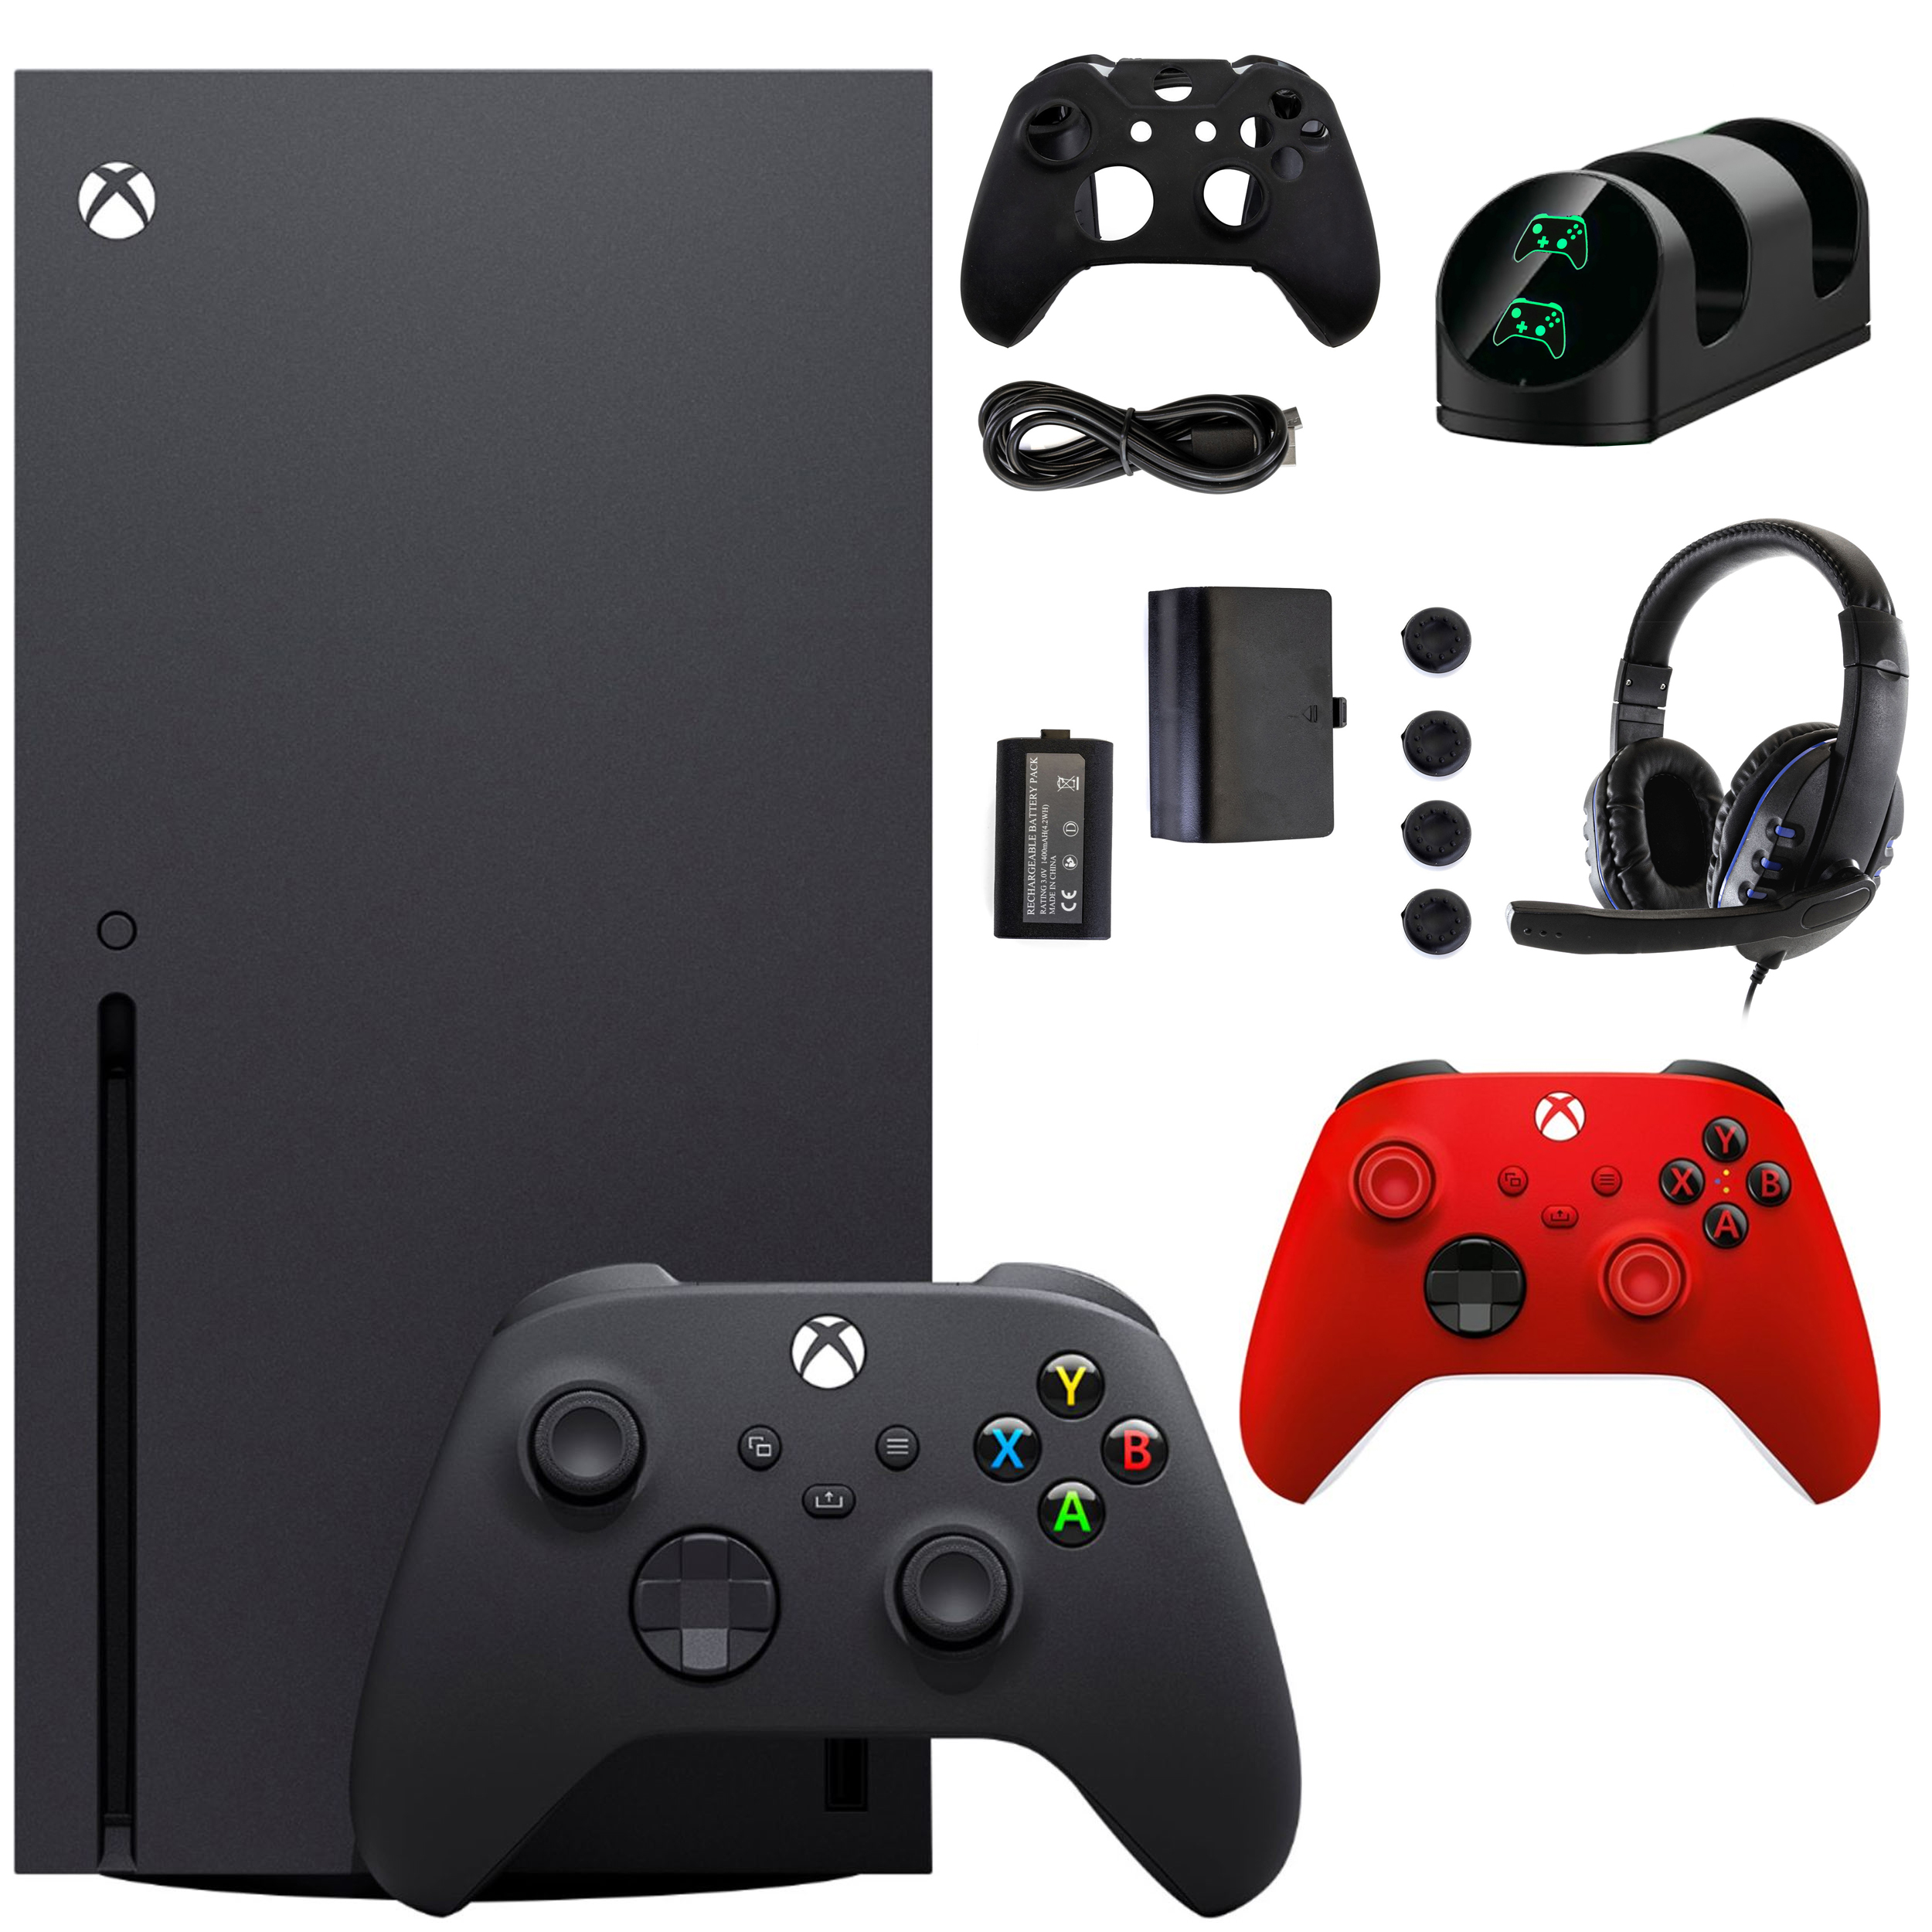 Microsoft Xbox Series X 1TB Console with Extra Red Controller Accessories Kit